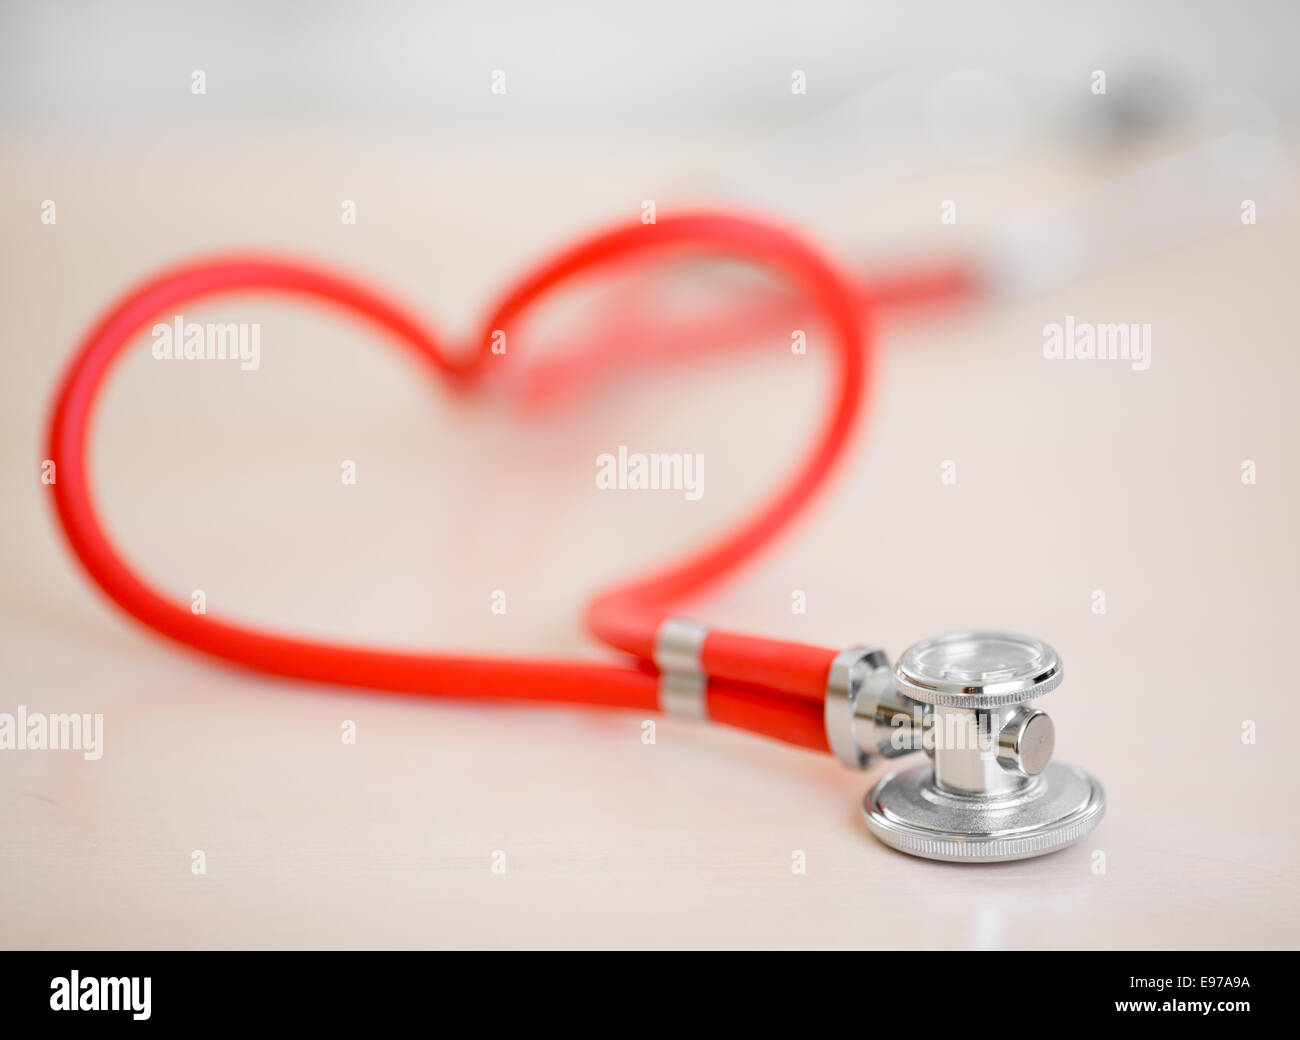 Red medical stethoscope in shape of heart on table Stock Photo